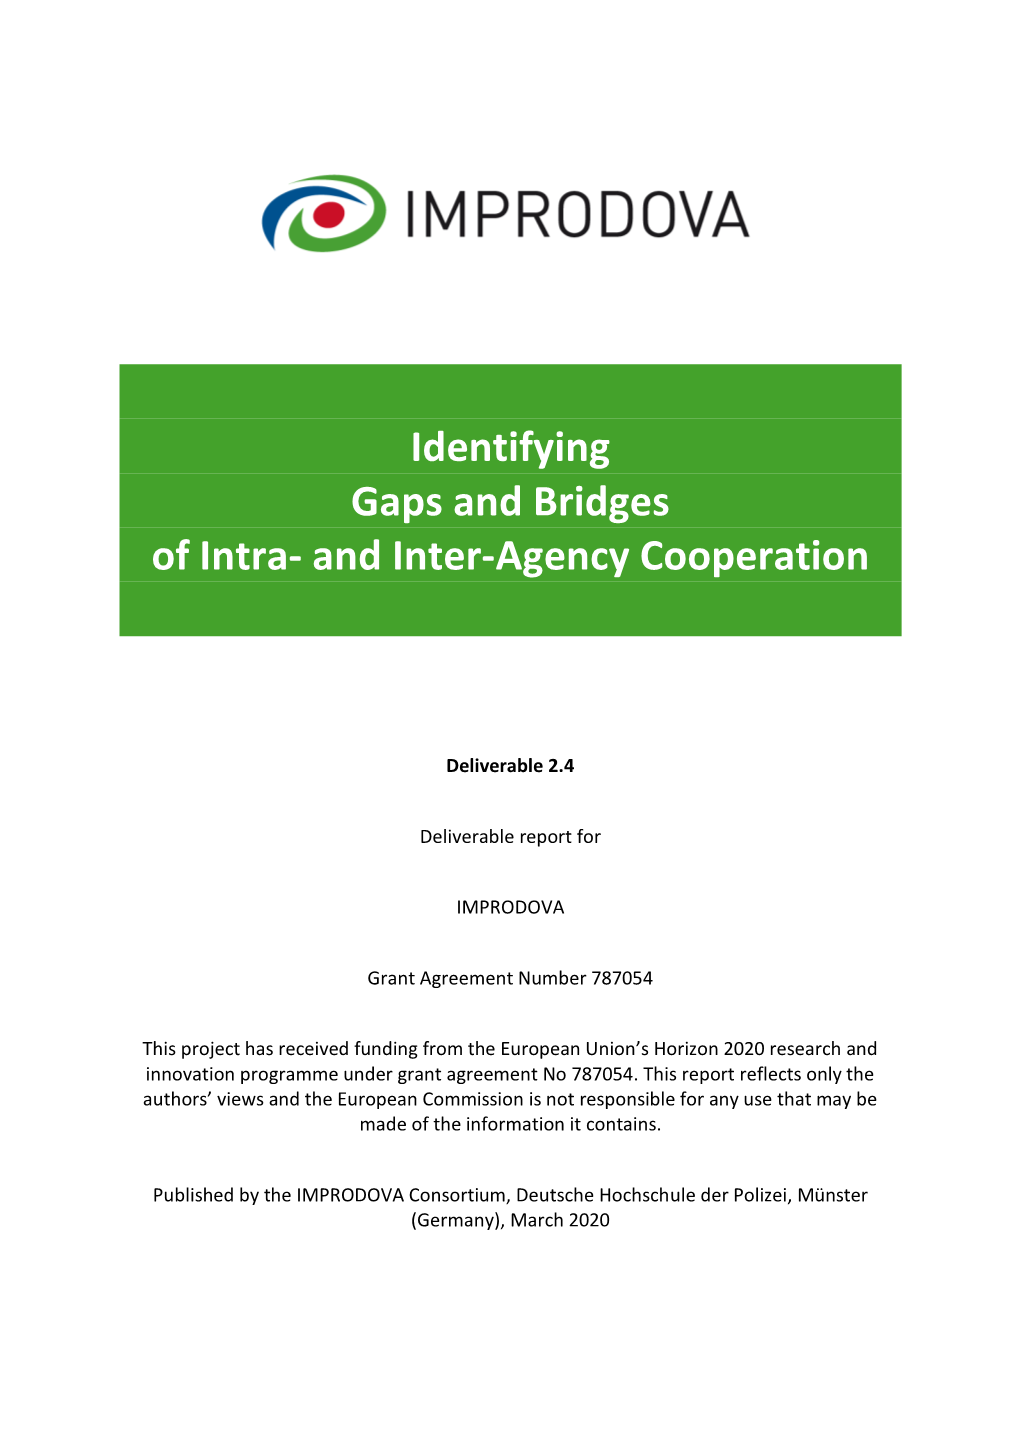 Identifying Gaps and Bridges of Intra- and Inter-Agency Cooperation